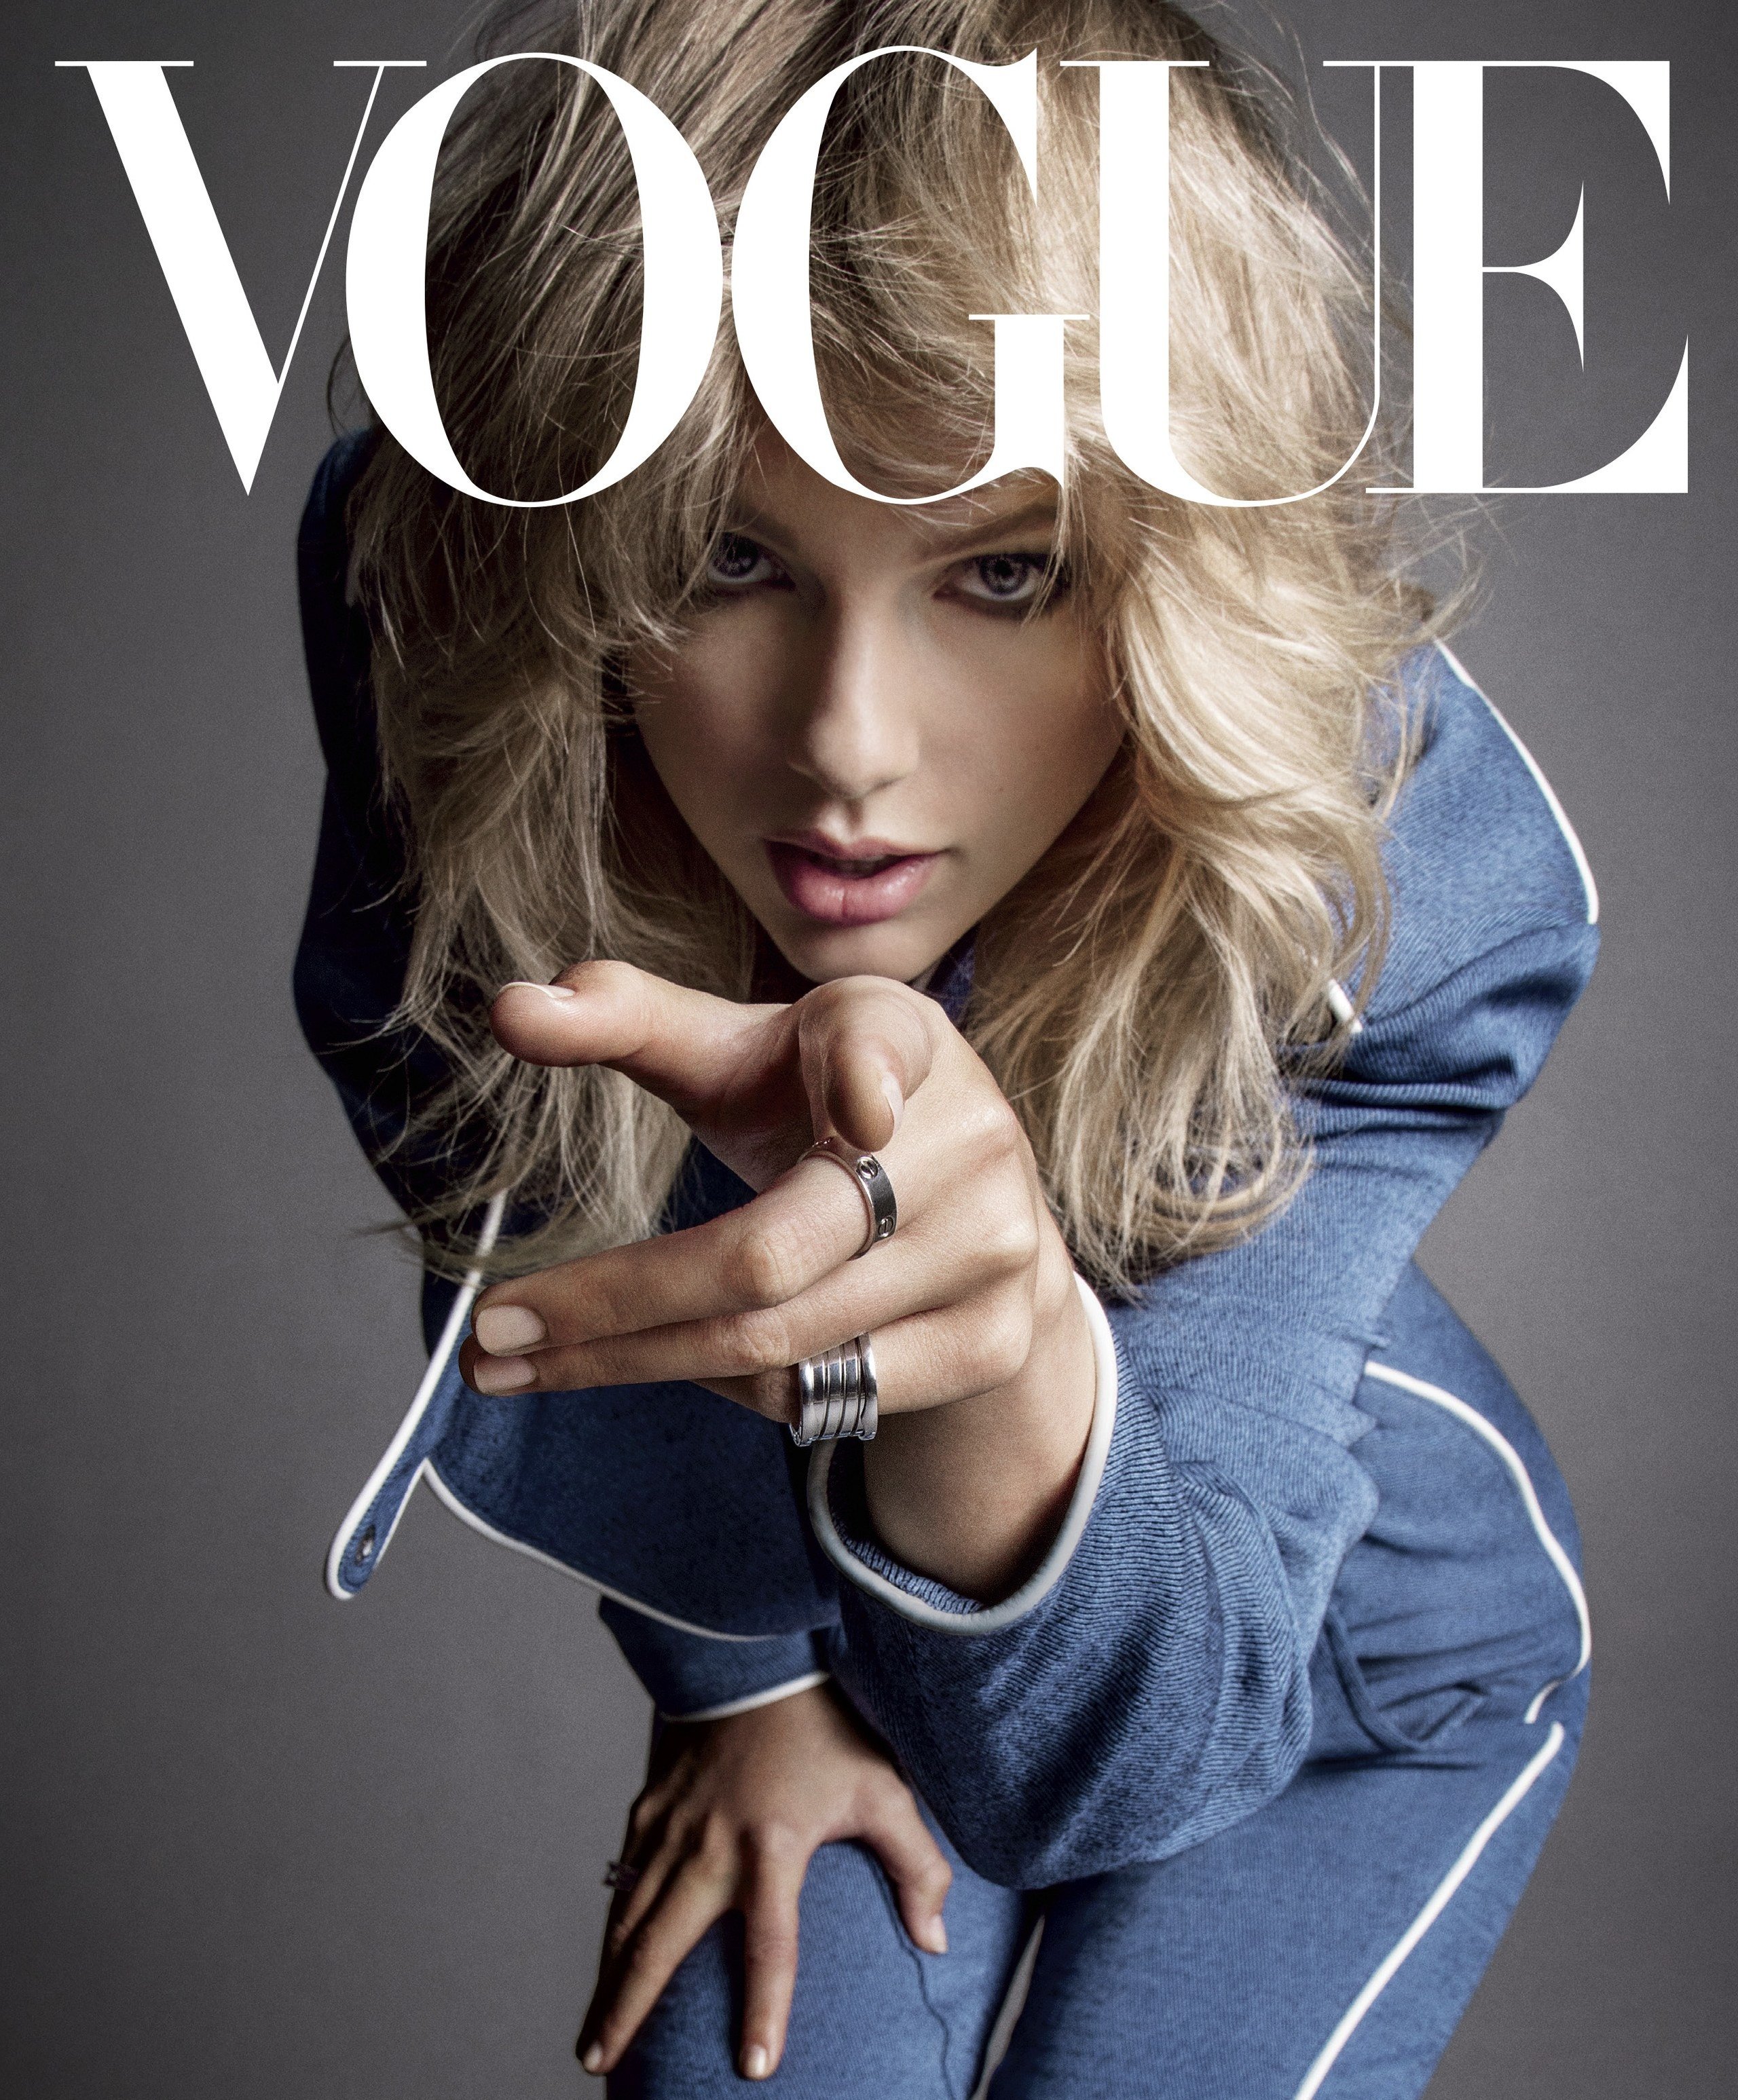 Taylor Swift's September Issue: The Singer On Sexism